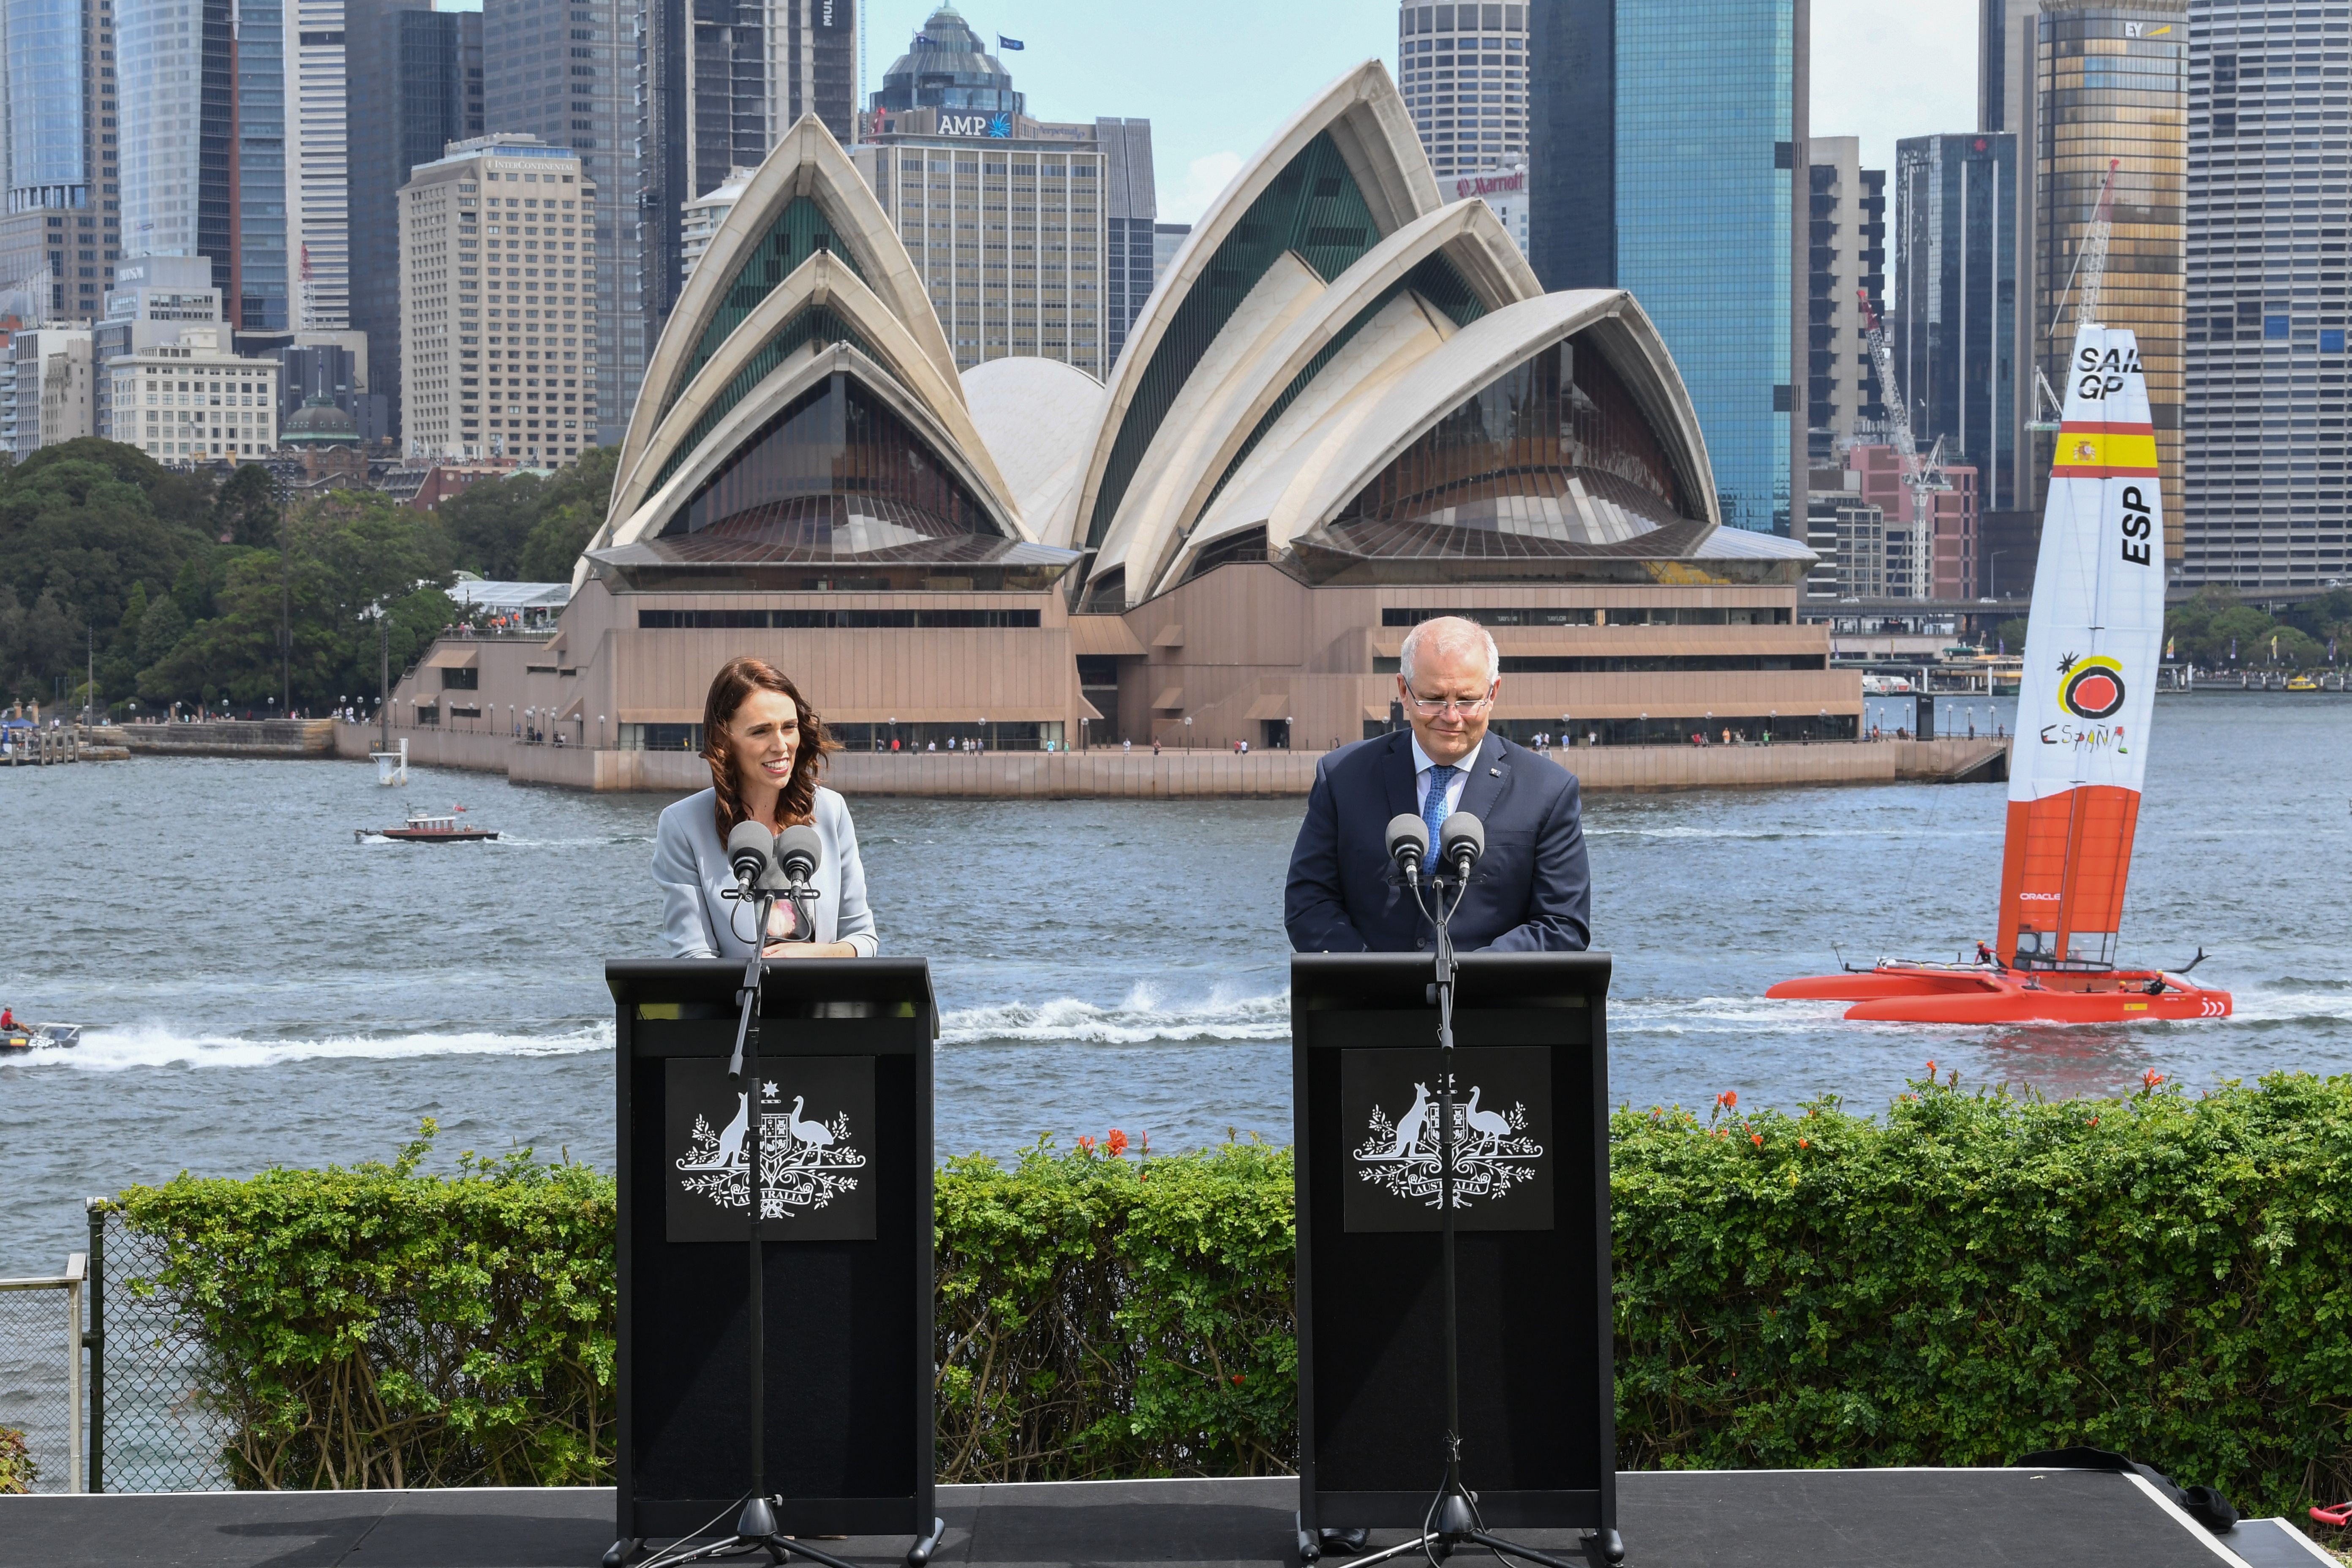 The prime ministers of New Zealand and Australia at podiums with the Sydney Opera House in the background.